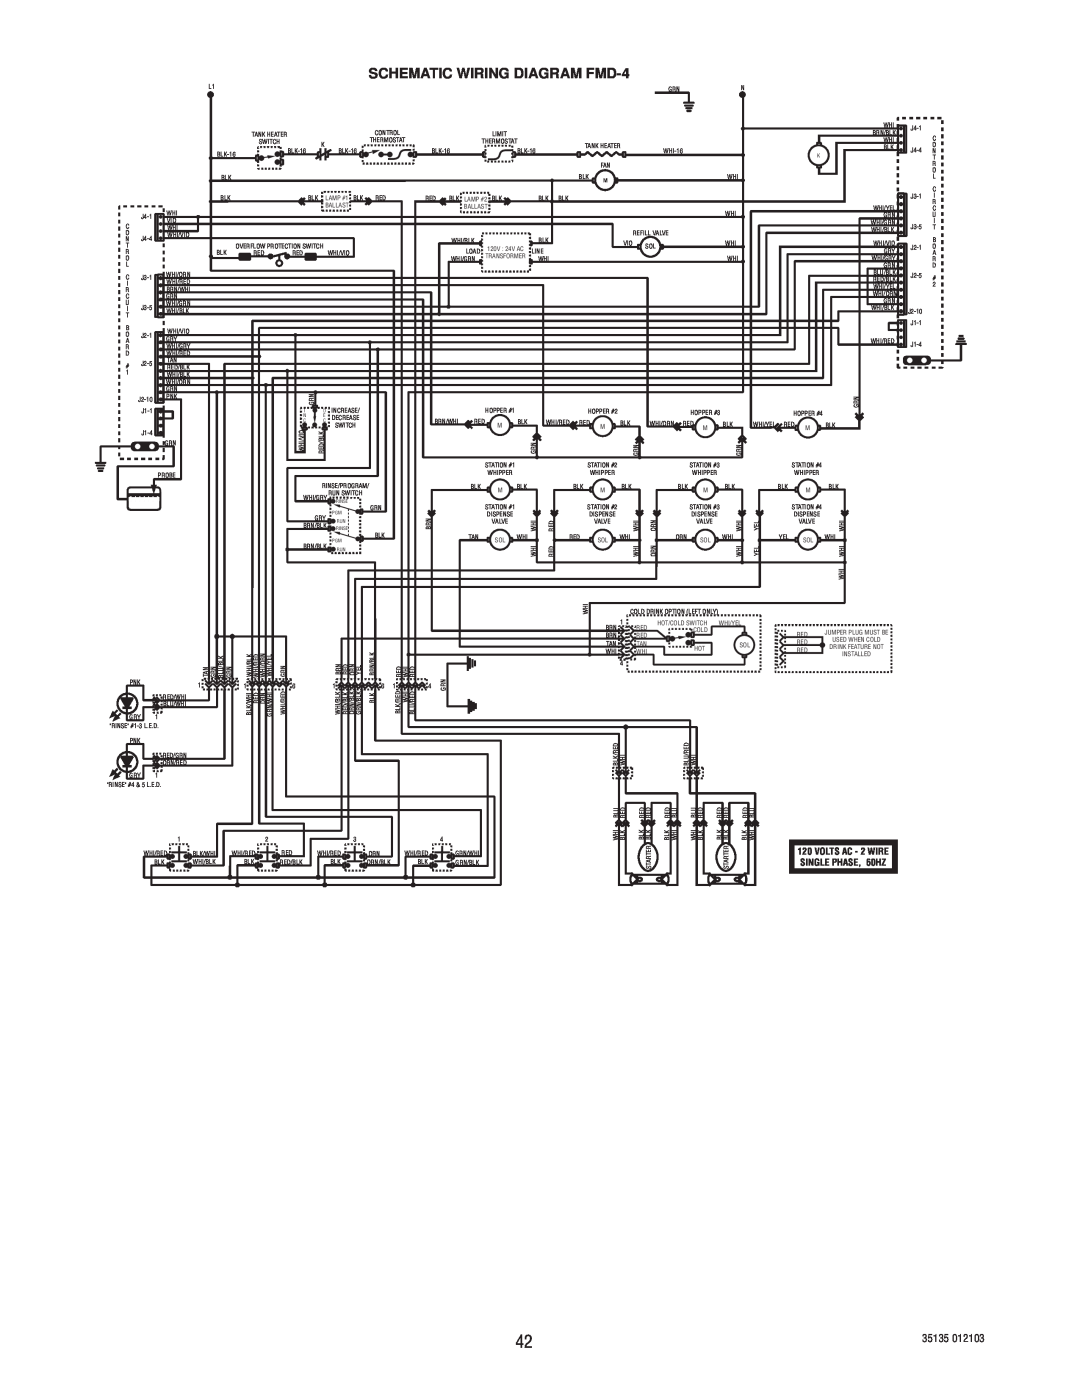 Bunn FMD-5 service manual SCHEMATIC WIRING DIAGRAM FMD-4, VOLTS AC - 2 WIRE SINGLE PHASE, 60HZ 